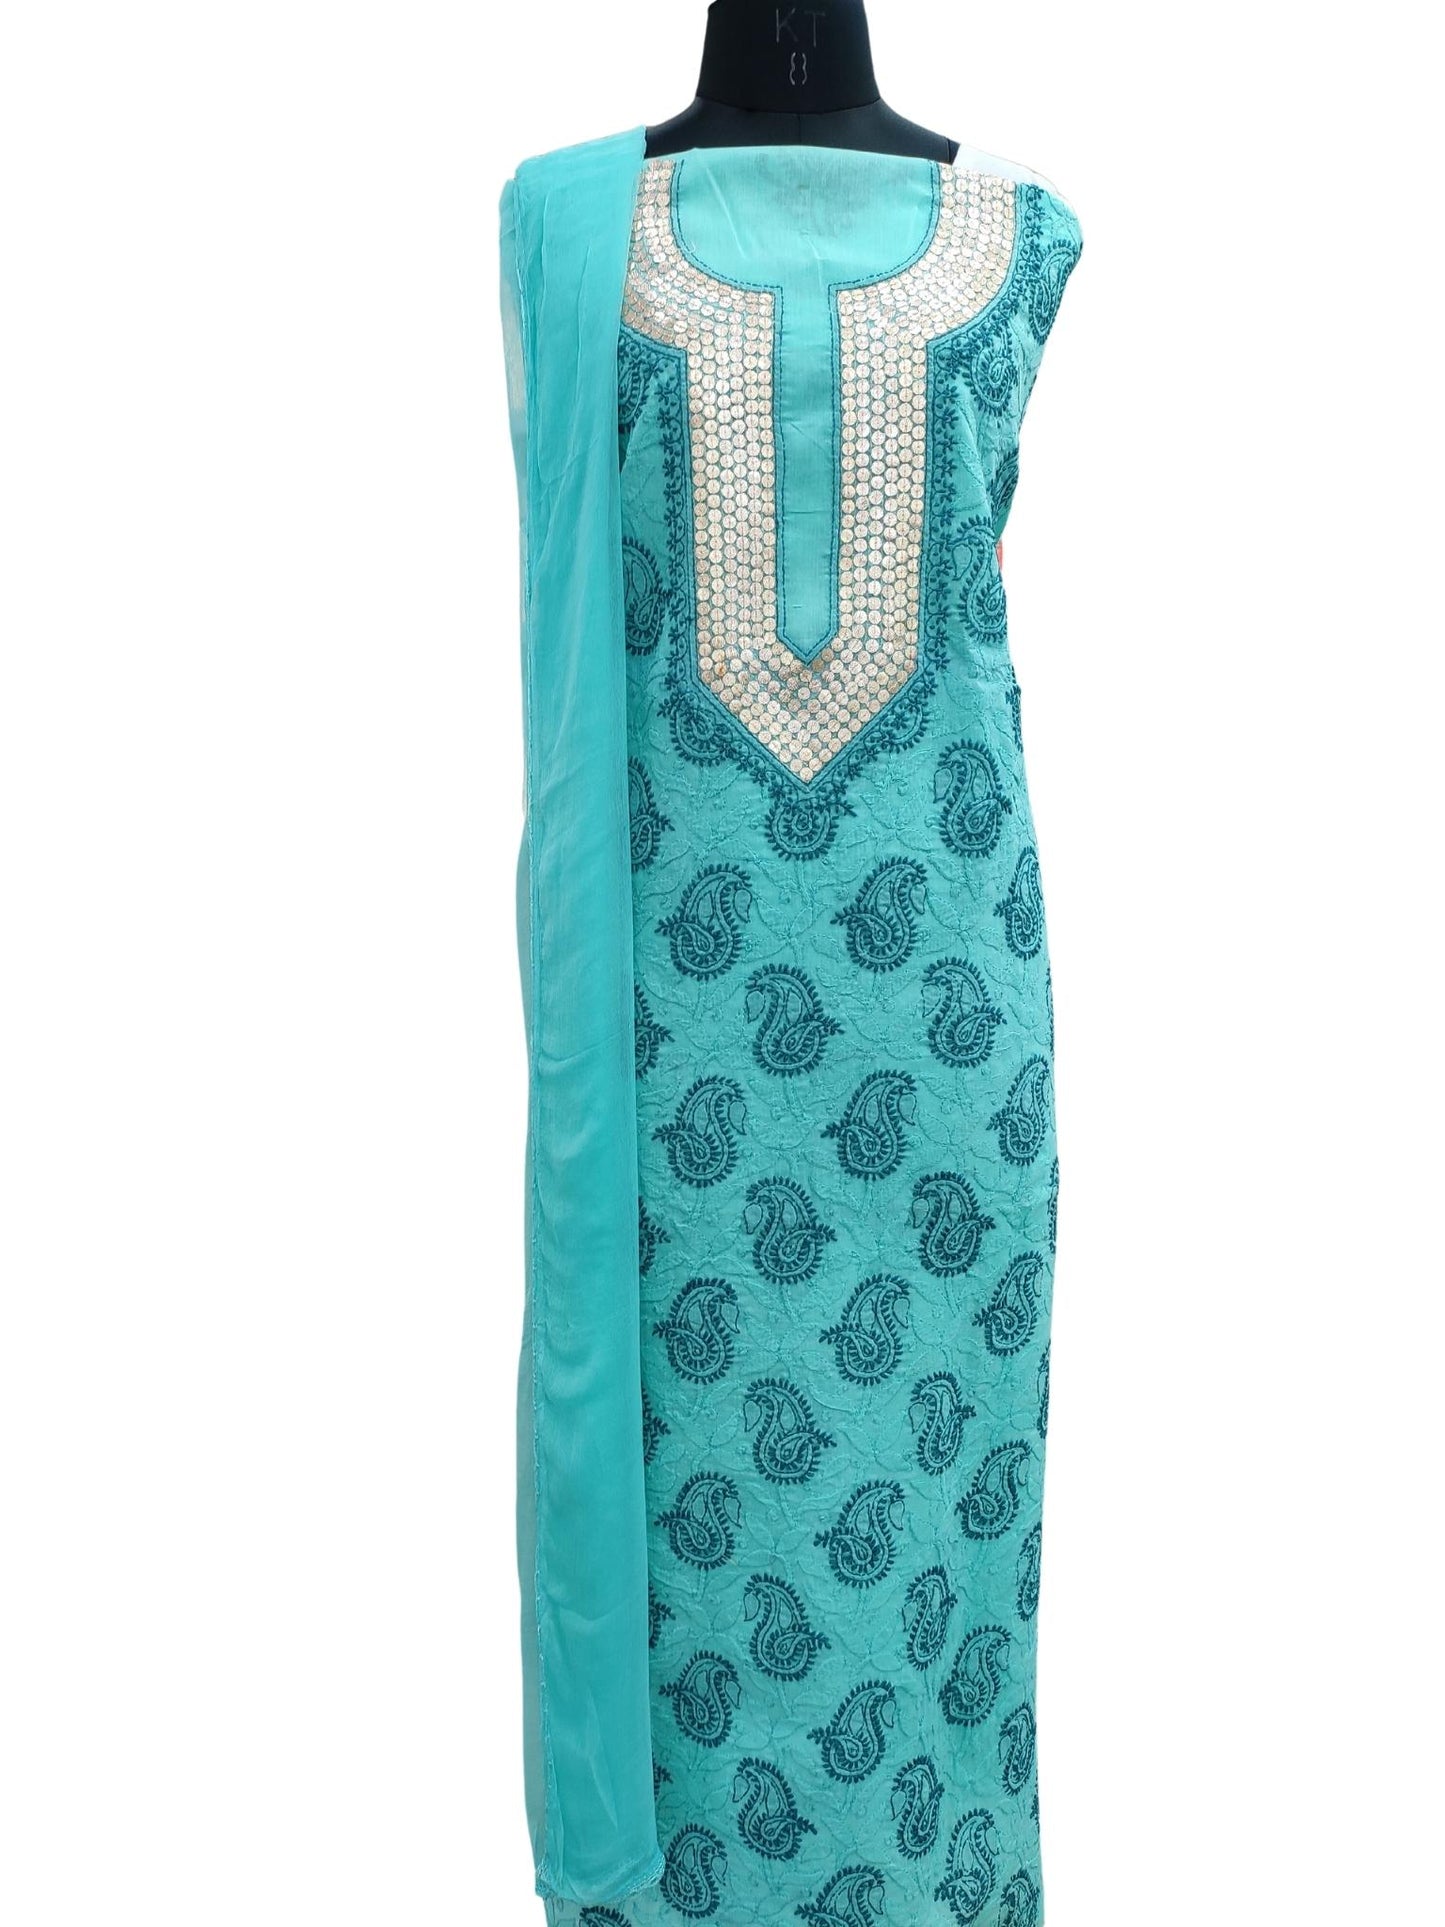 Shyamal Chikan Hand Embroidered Sea Green Cotton Lucknowi Chikankari Unstitched Suit Piece with Gotapatti work- S18329